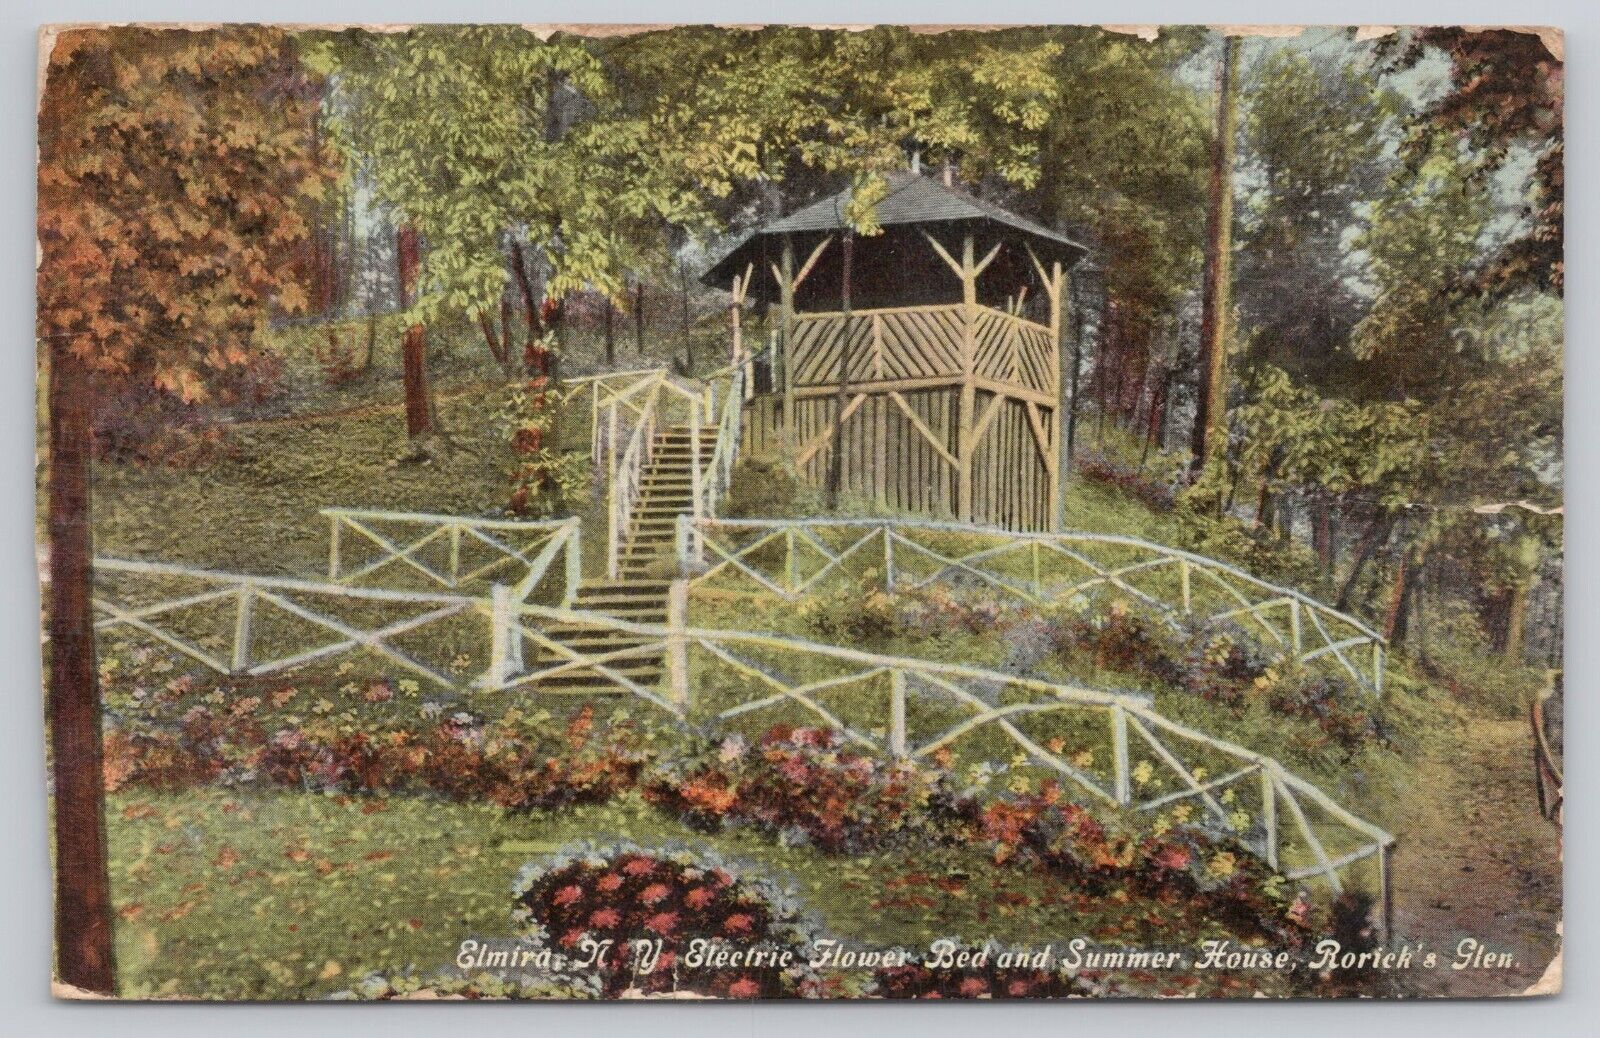 Vintage Post Card Electric Flower Bed & Summer House, Rorick\'s Glen. A170